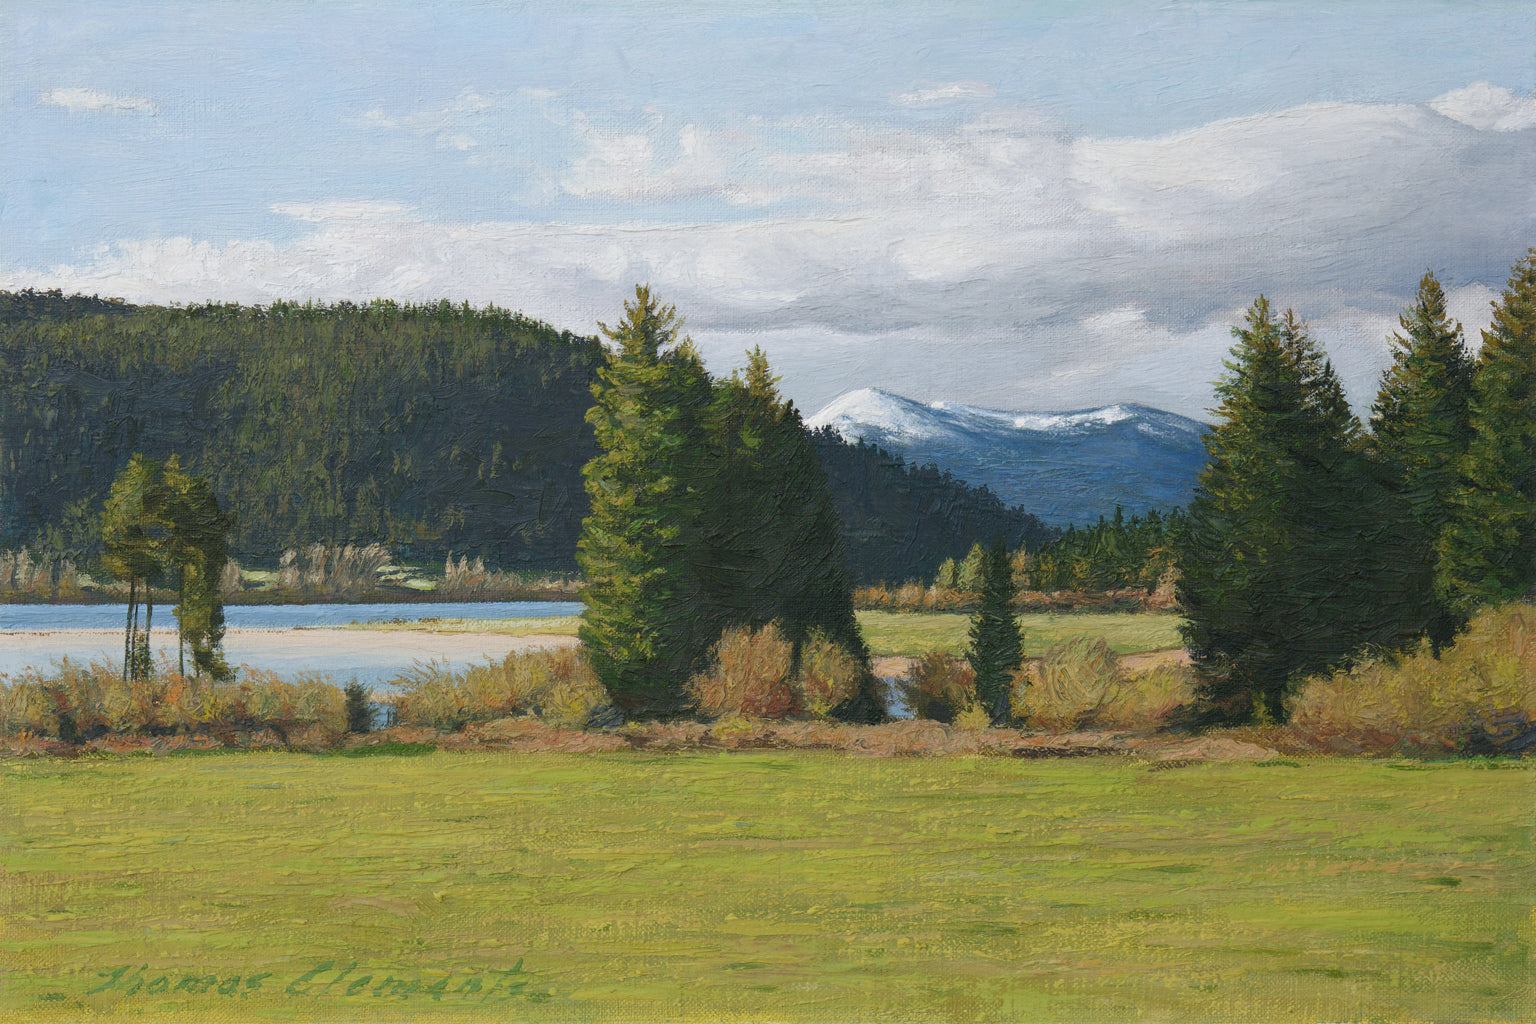 Pend Oreille River With Snowy Mountains Painting Giclée Print